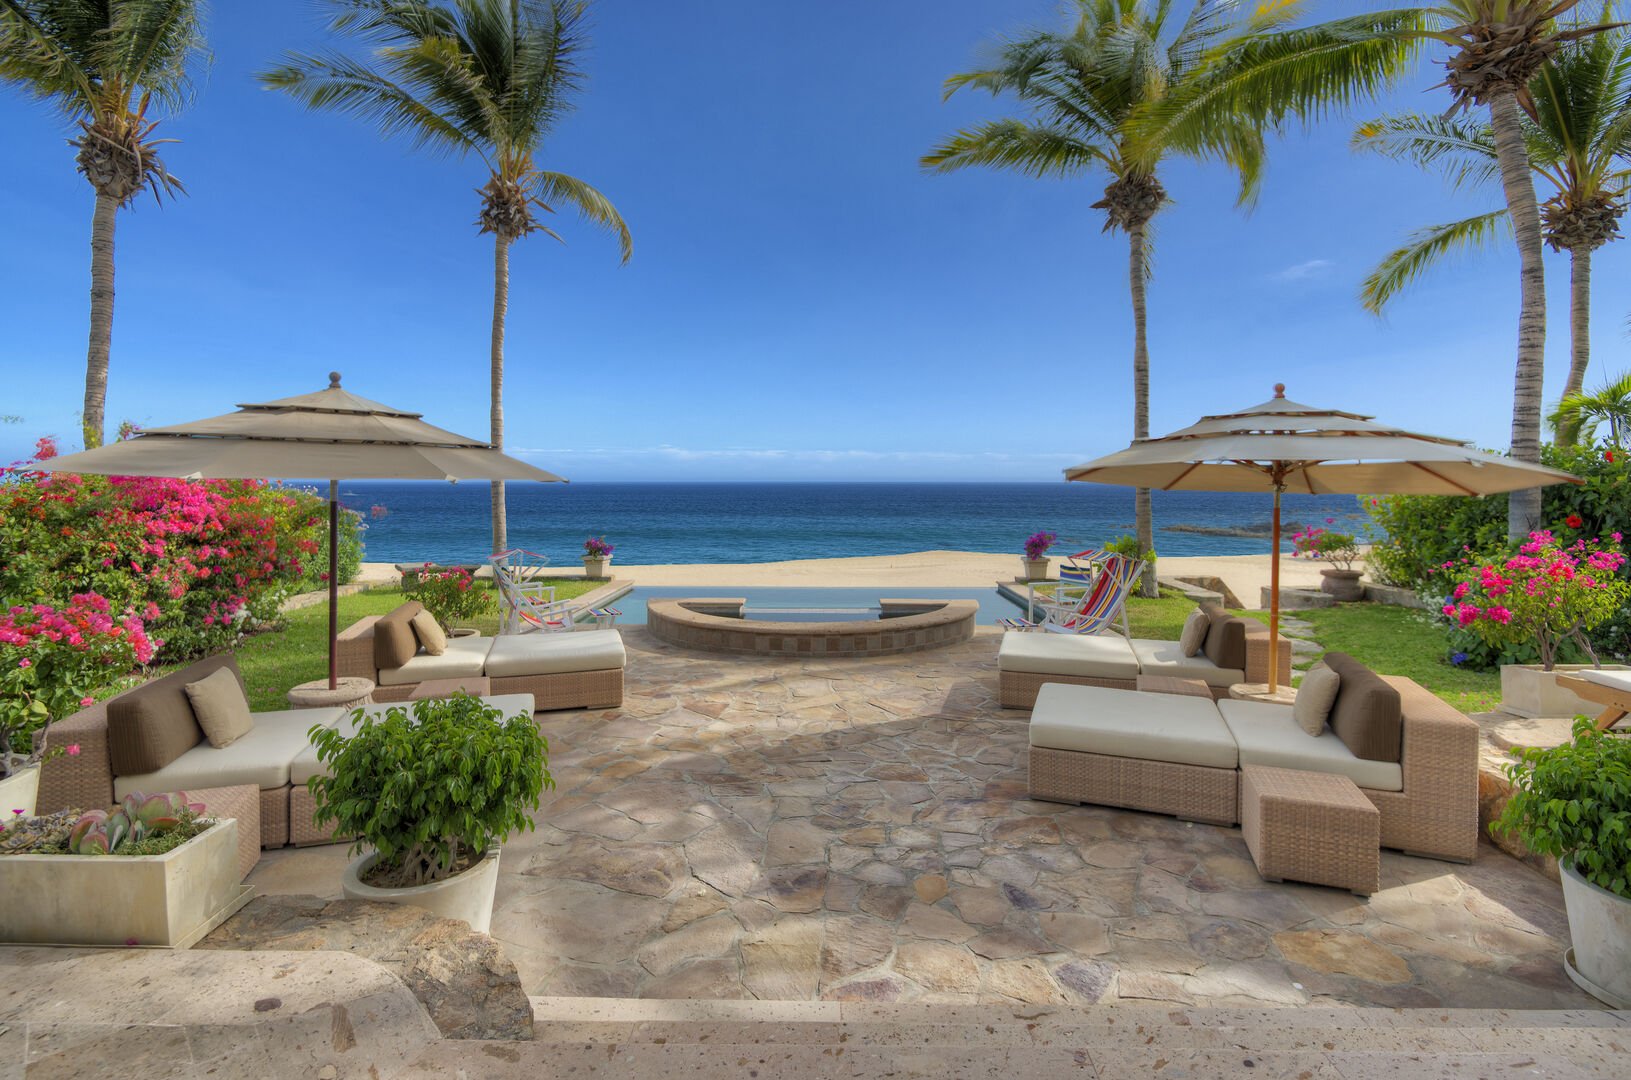 Chaise lounges by the infinity pool in our beachfront villa in Los Cabos, Mexico